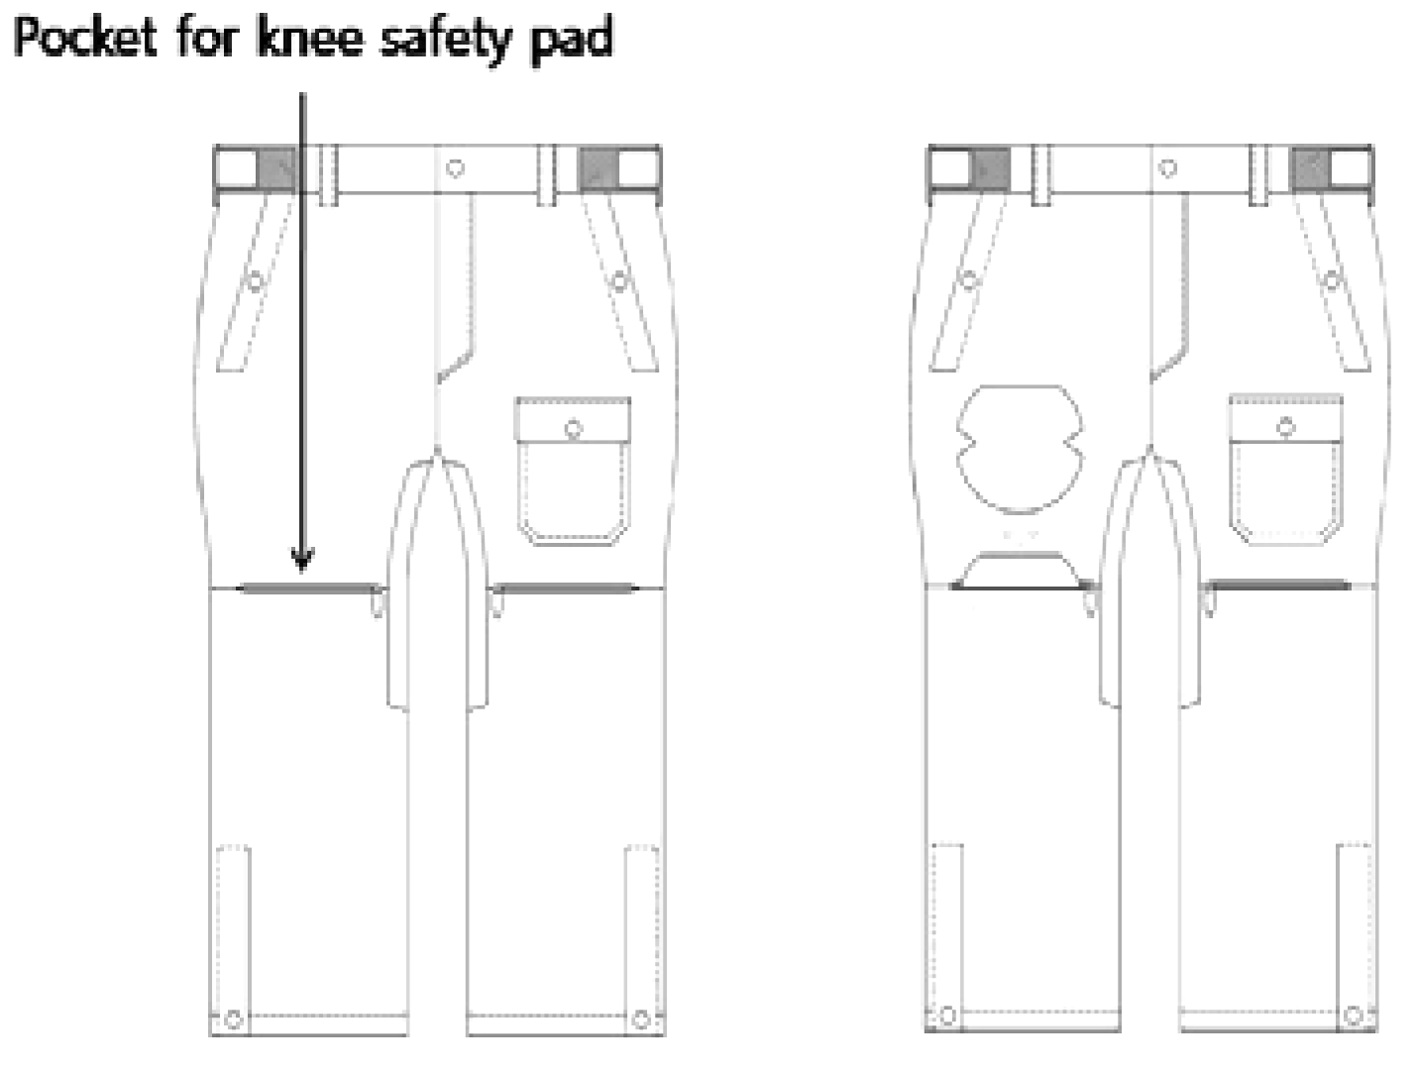 The pants with safety pad (Front side).